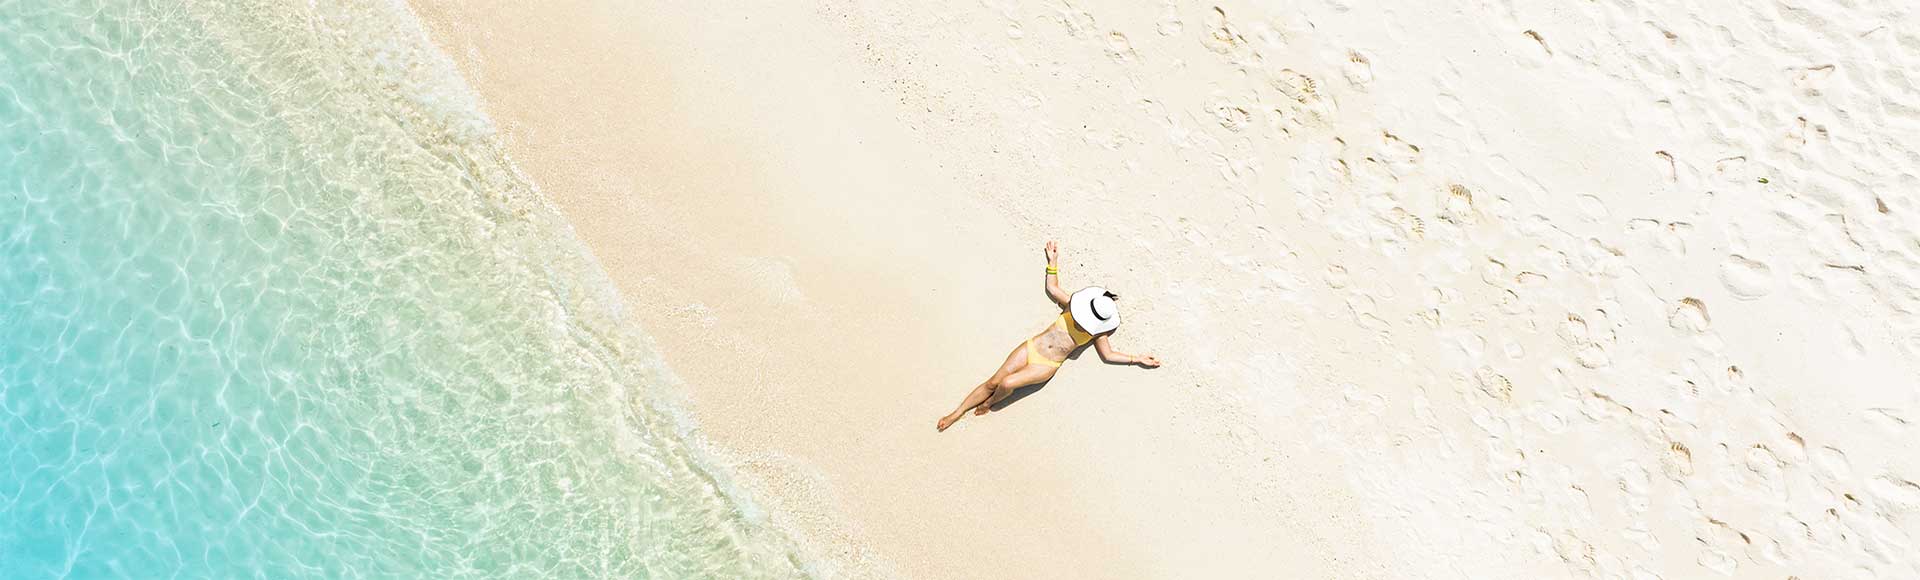 Woman laying on deserted Seven Mile Beach, Cayman Islands